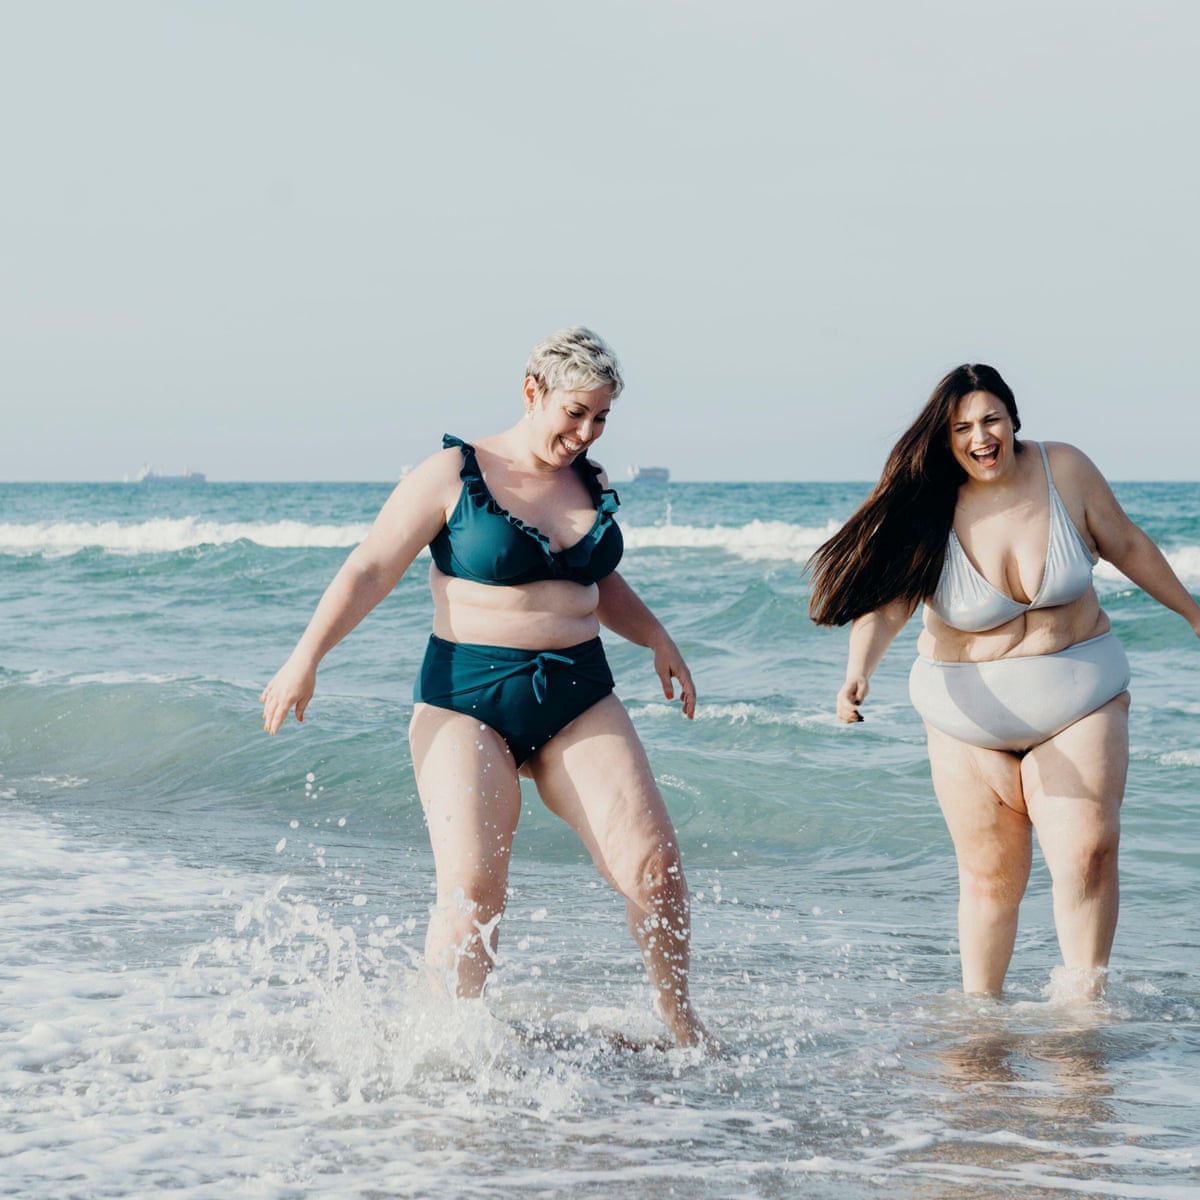 How to make swimwear sustainable: check the material, wash smart, and make  it last | Life and style | The Guardian